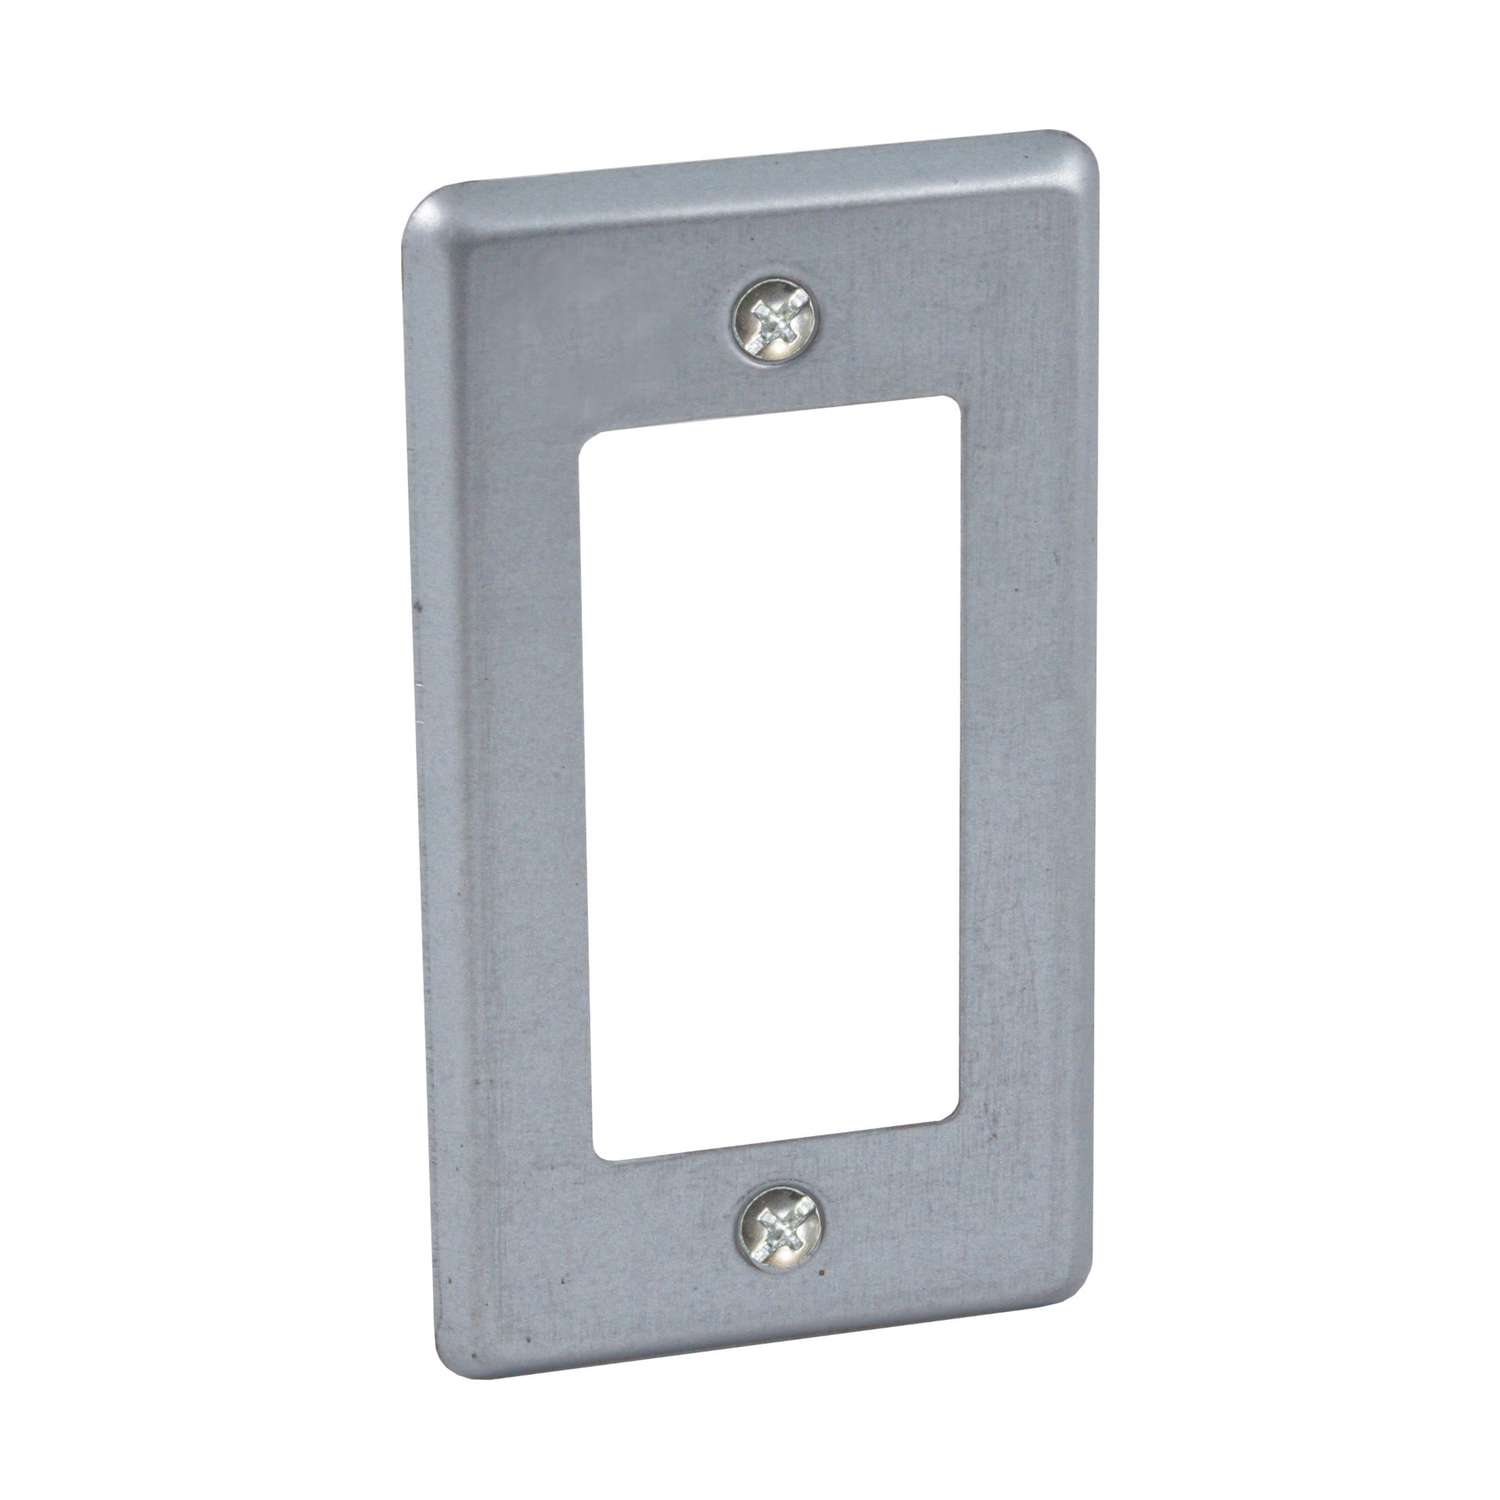 Raco  Square  Steel  Electrical Cover  For 1 Receptacle Gray 50169989883 